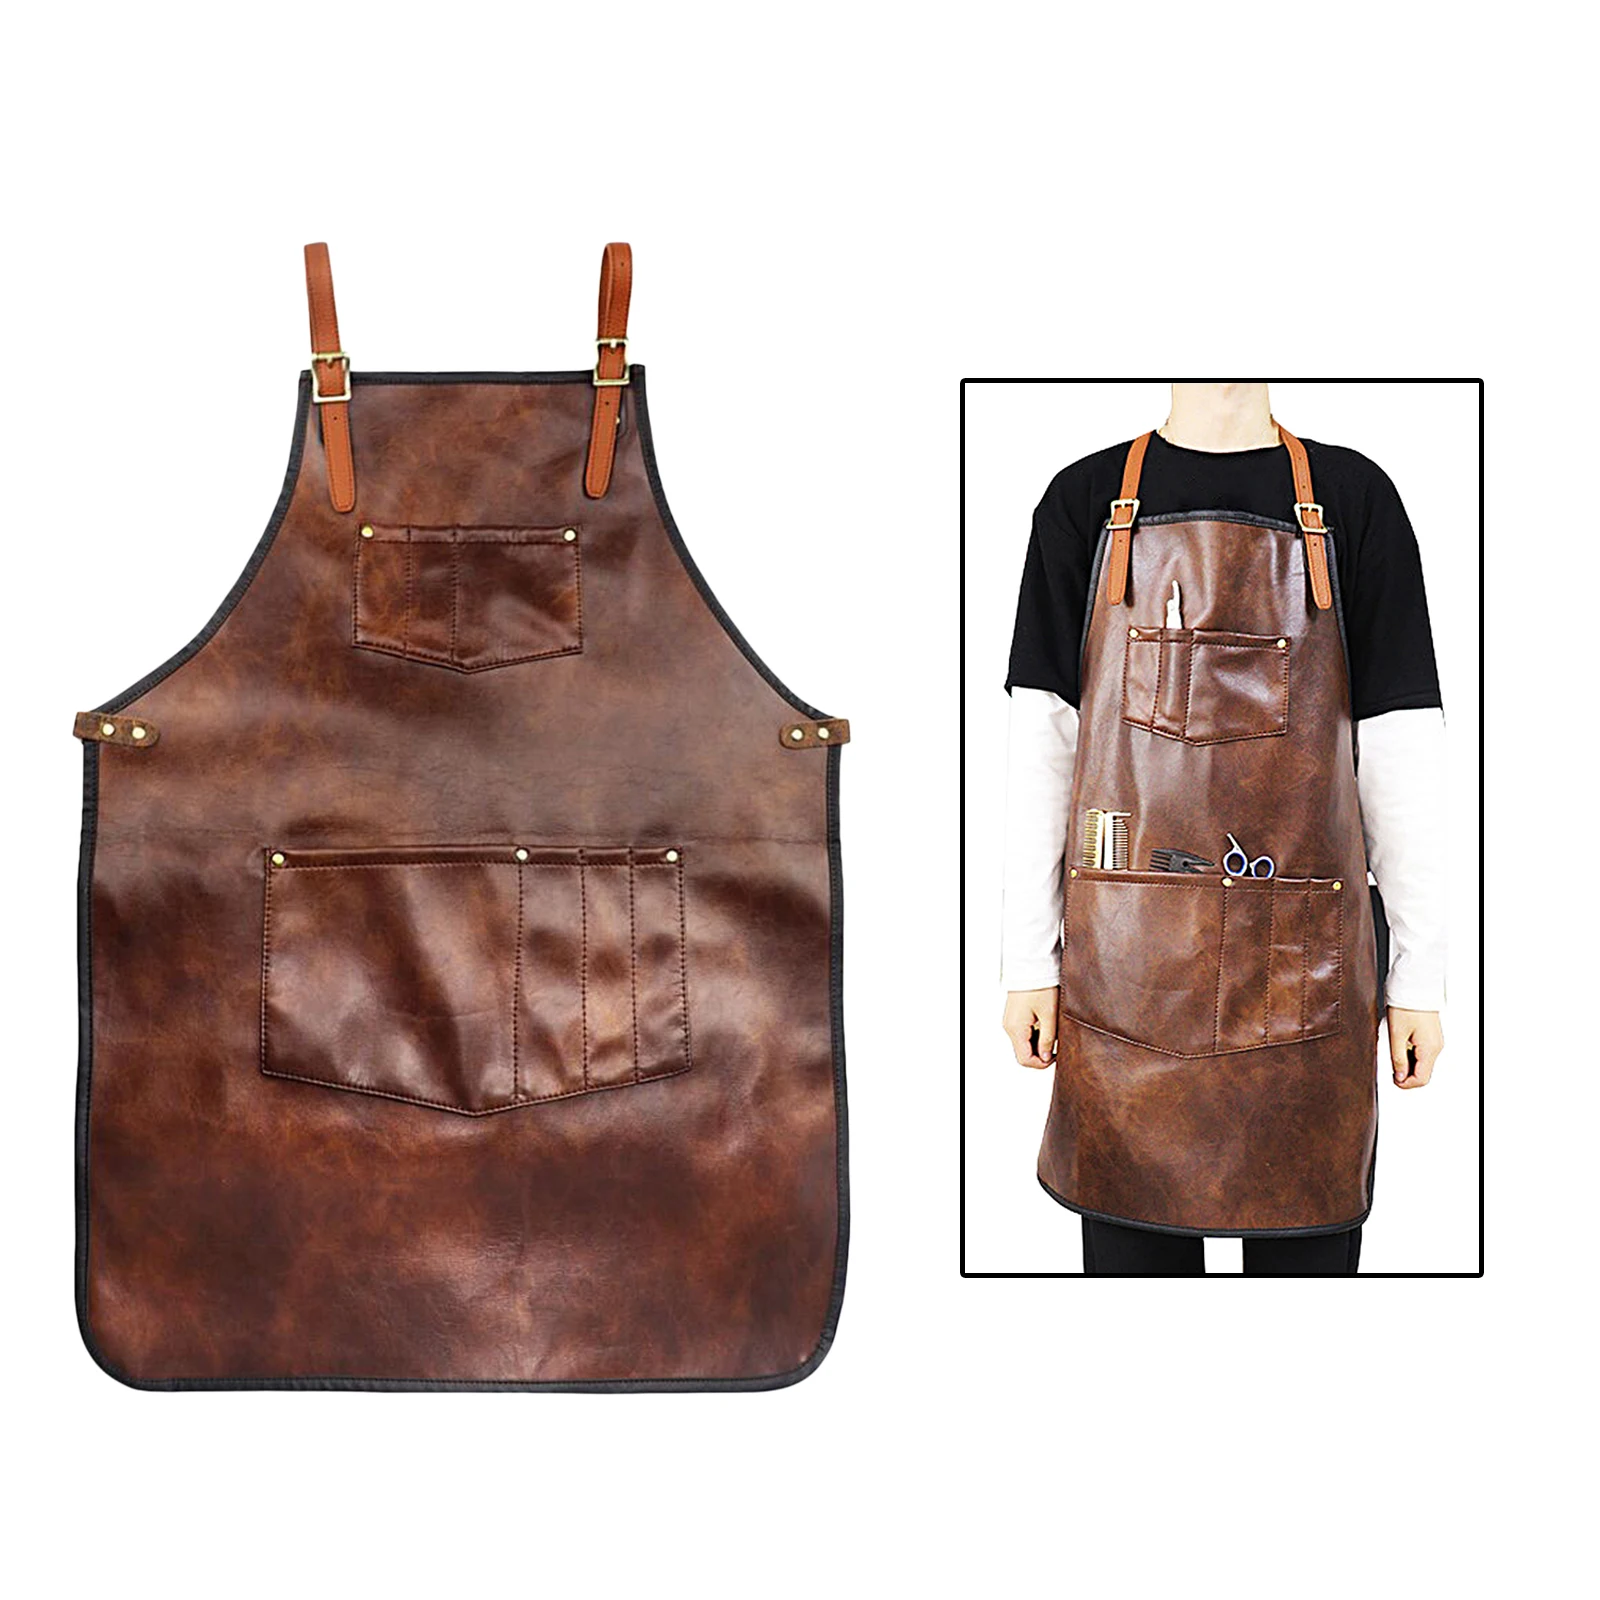 Professional CrossBack PU Leather Barber Apron Adjustable for Men and Women